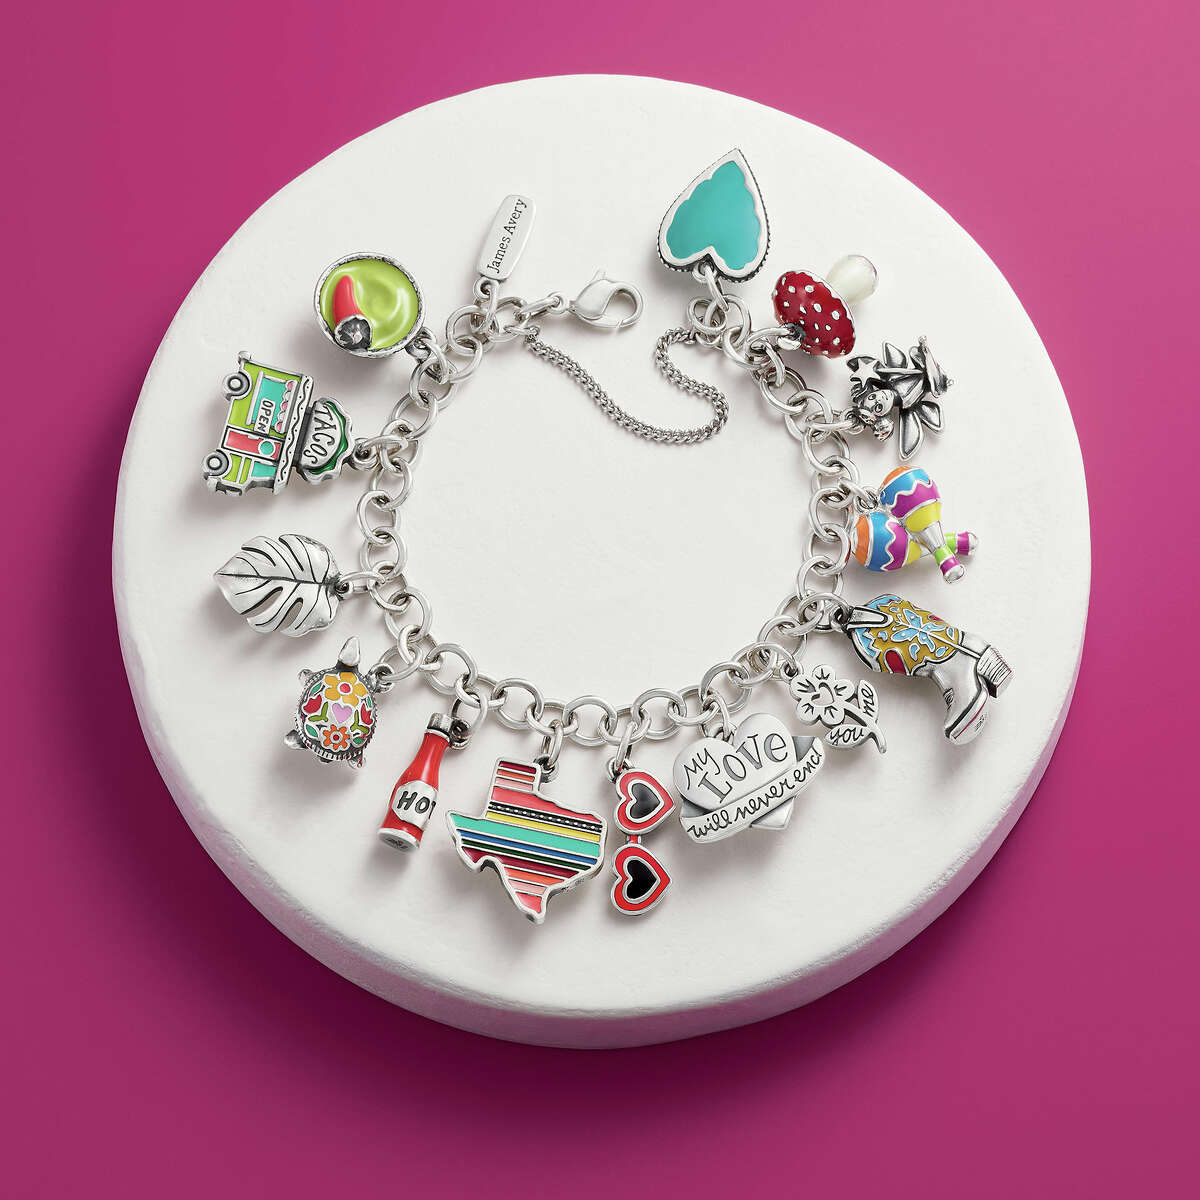 James Avery Artisan Jewelry - Easter charms are a fun way to